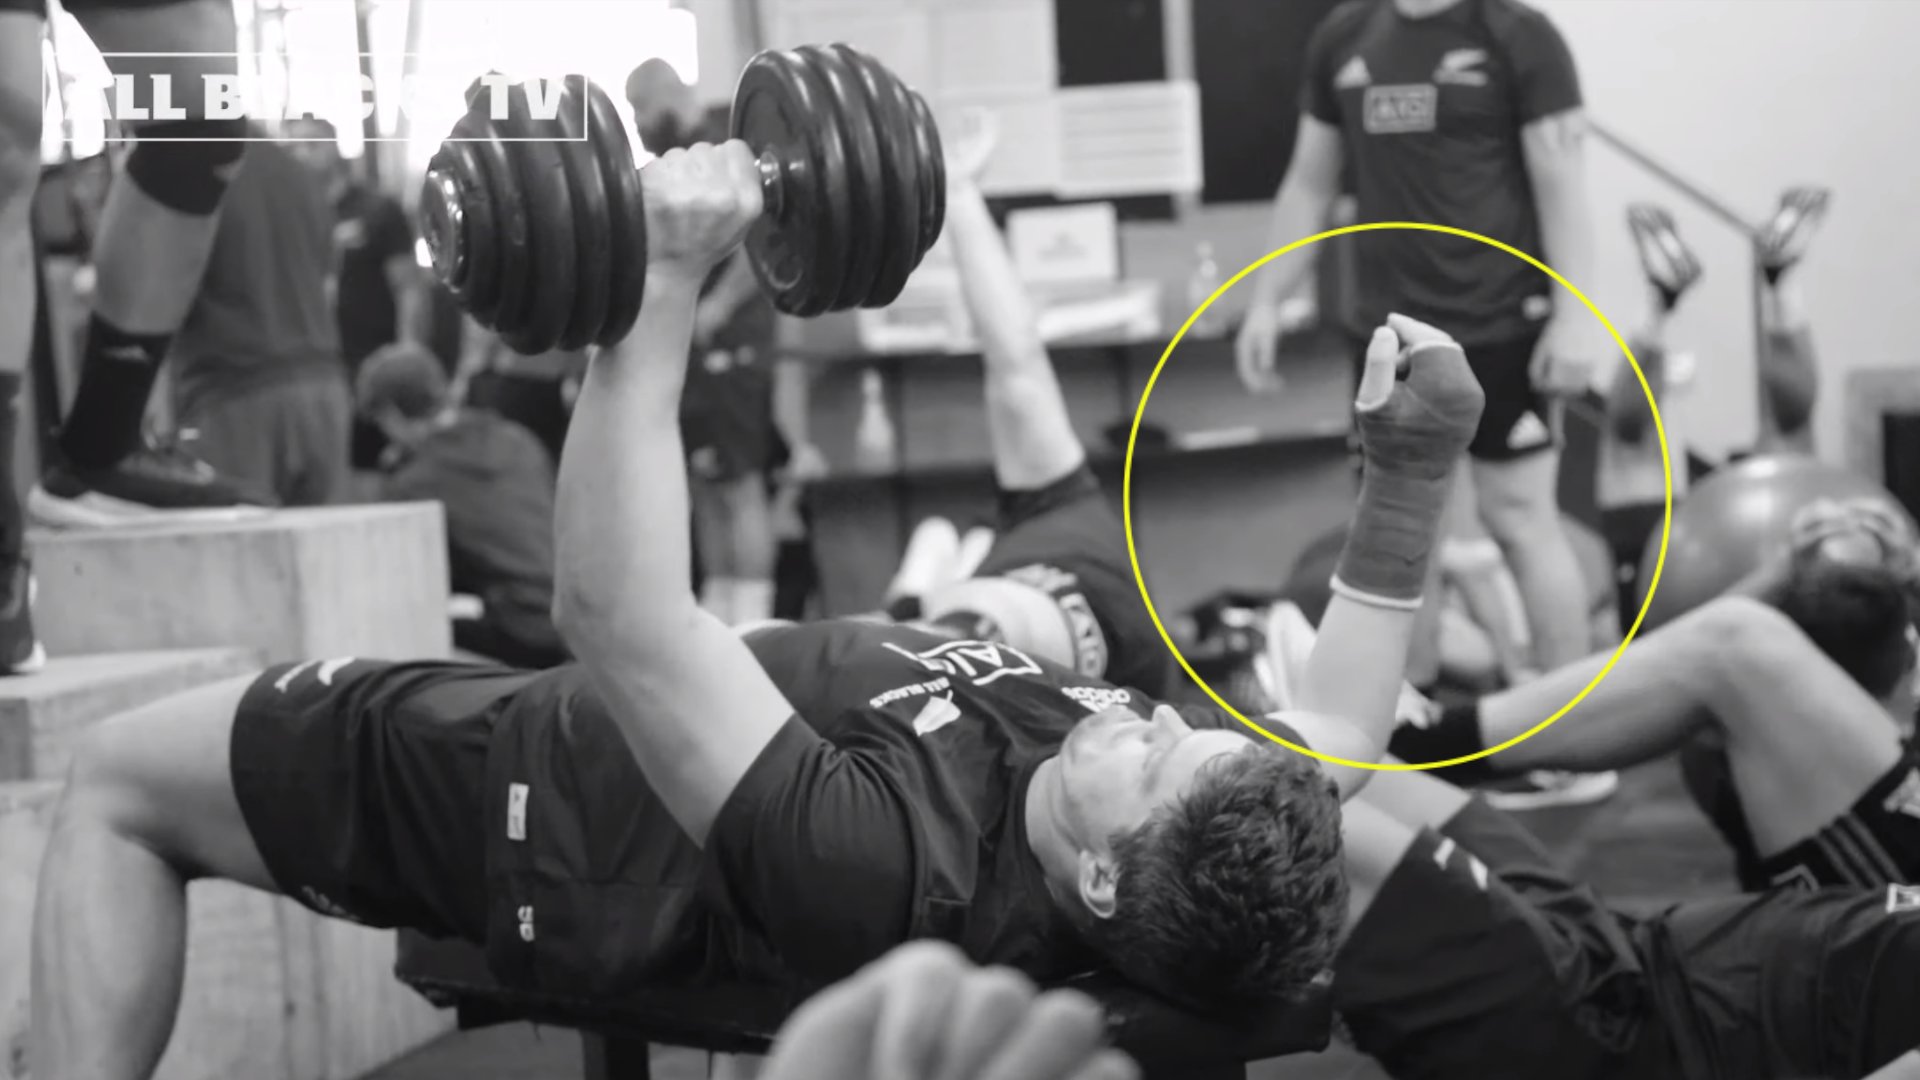 The latest All Blacks gym session is actually very impressive